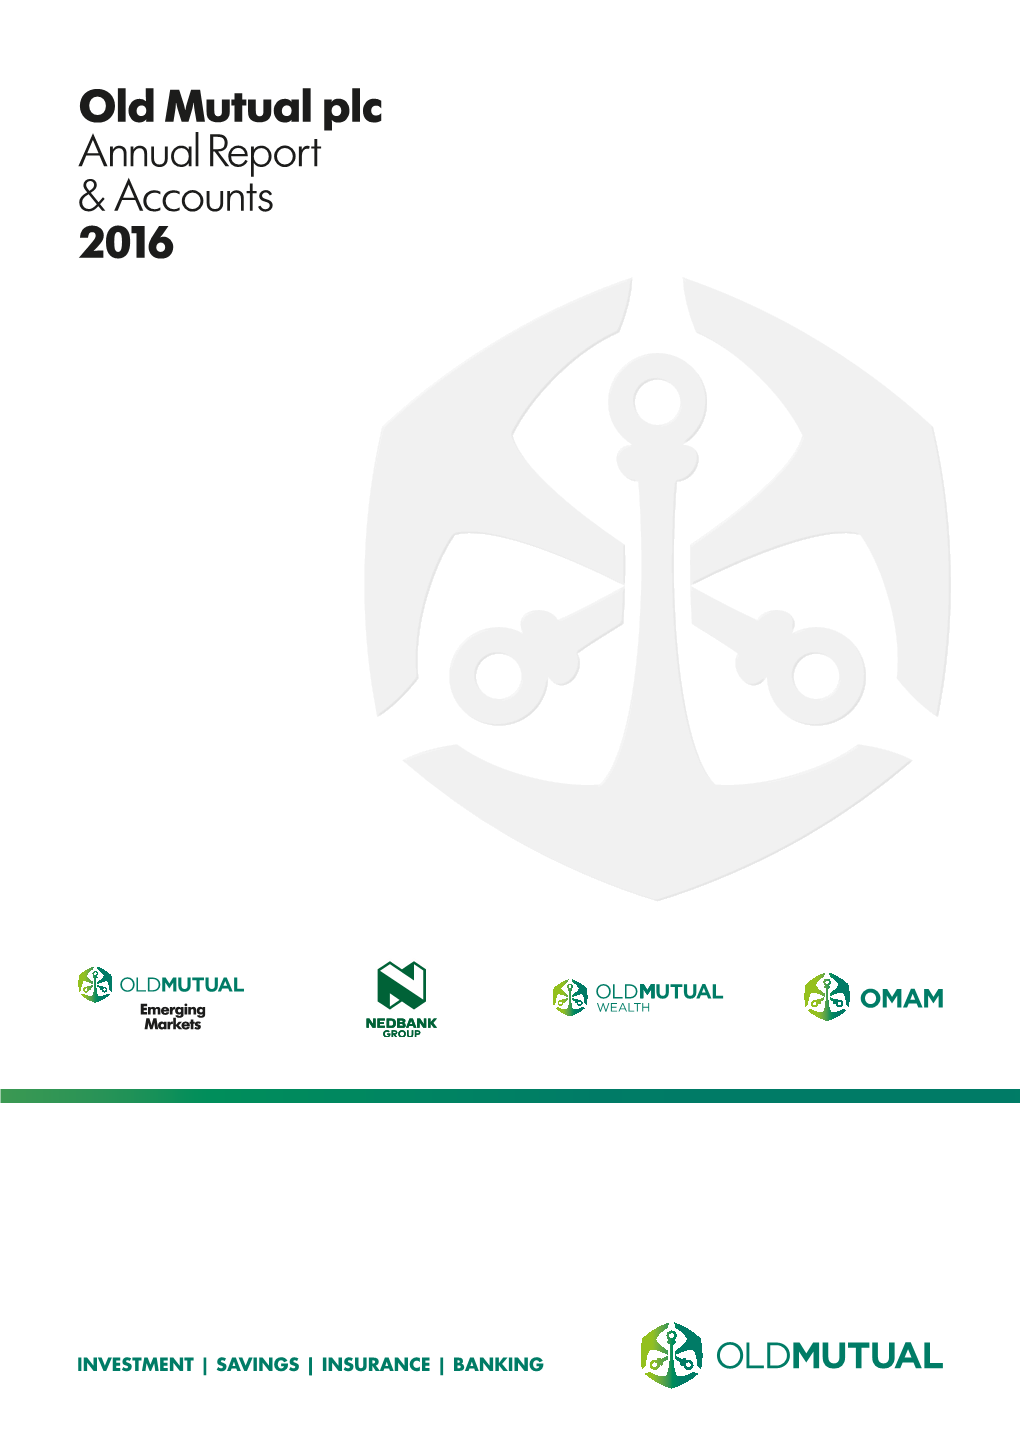 Old Mutual Plc Annual Report & Accounts 2016